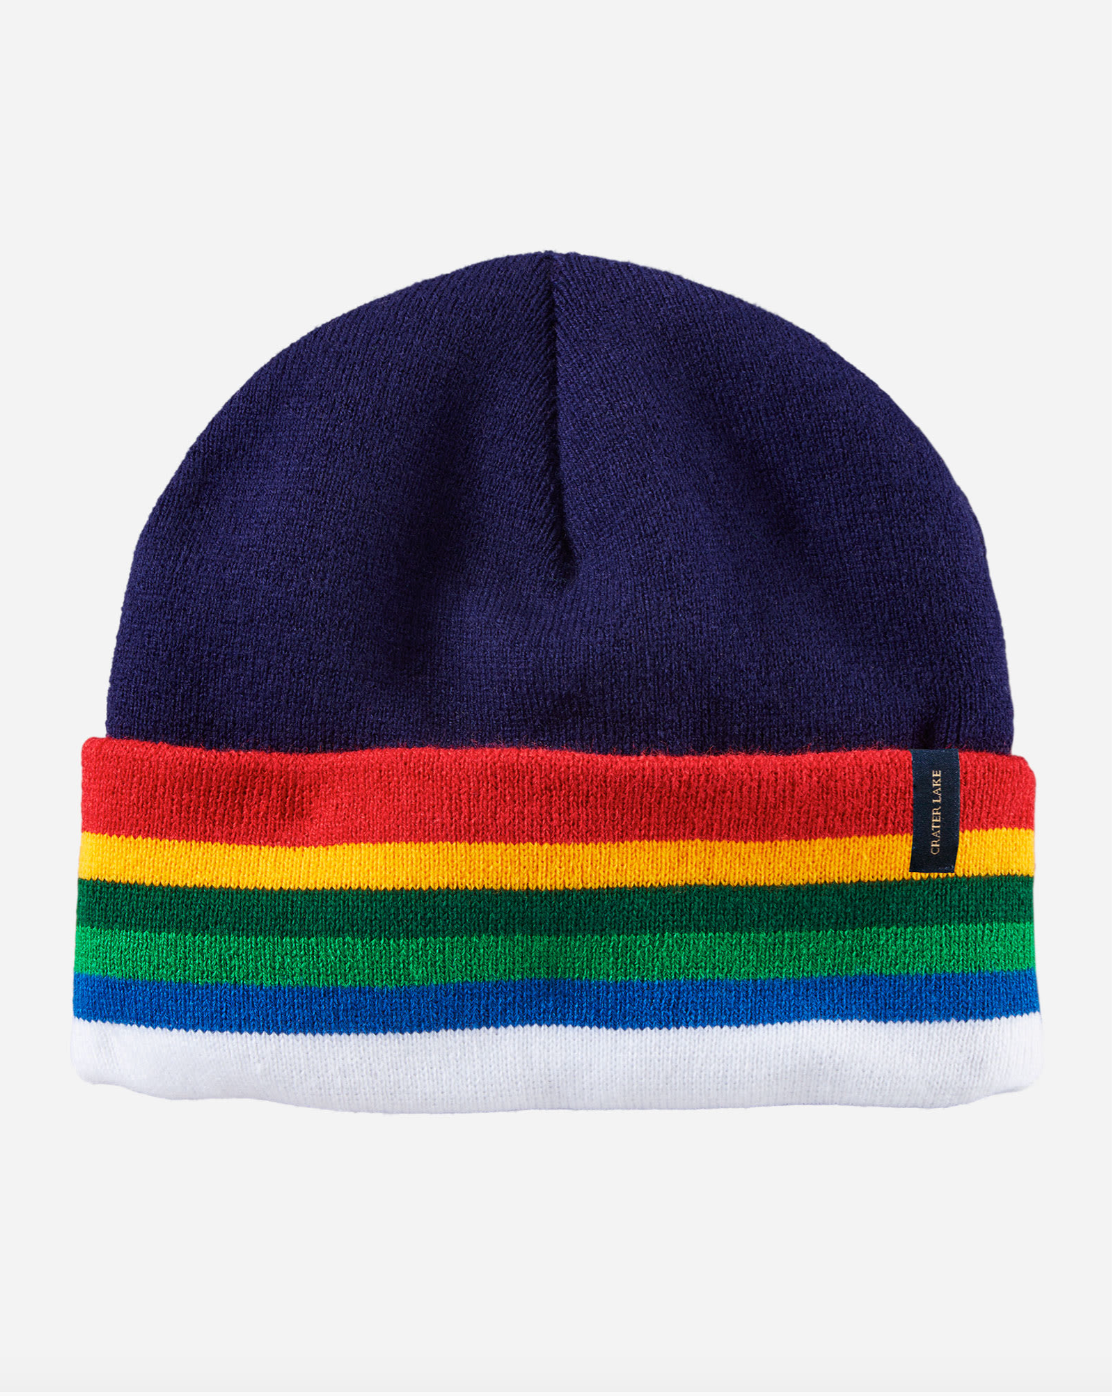 National Park Stripe Beanie<br>Crater Lake